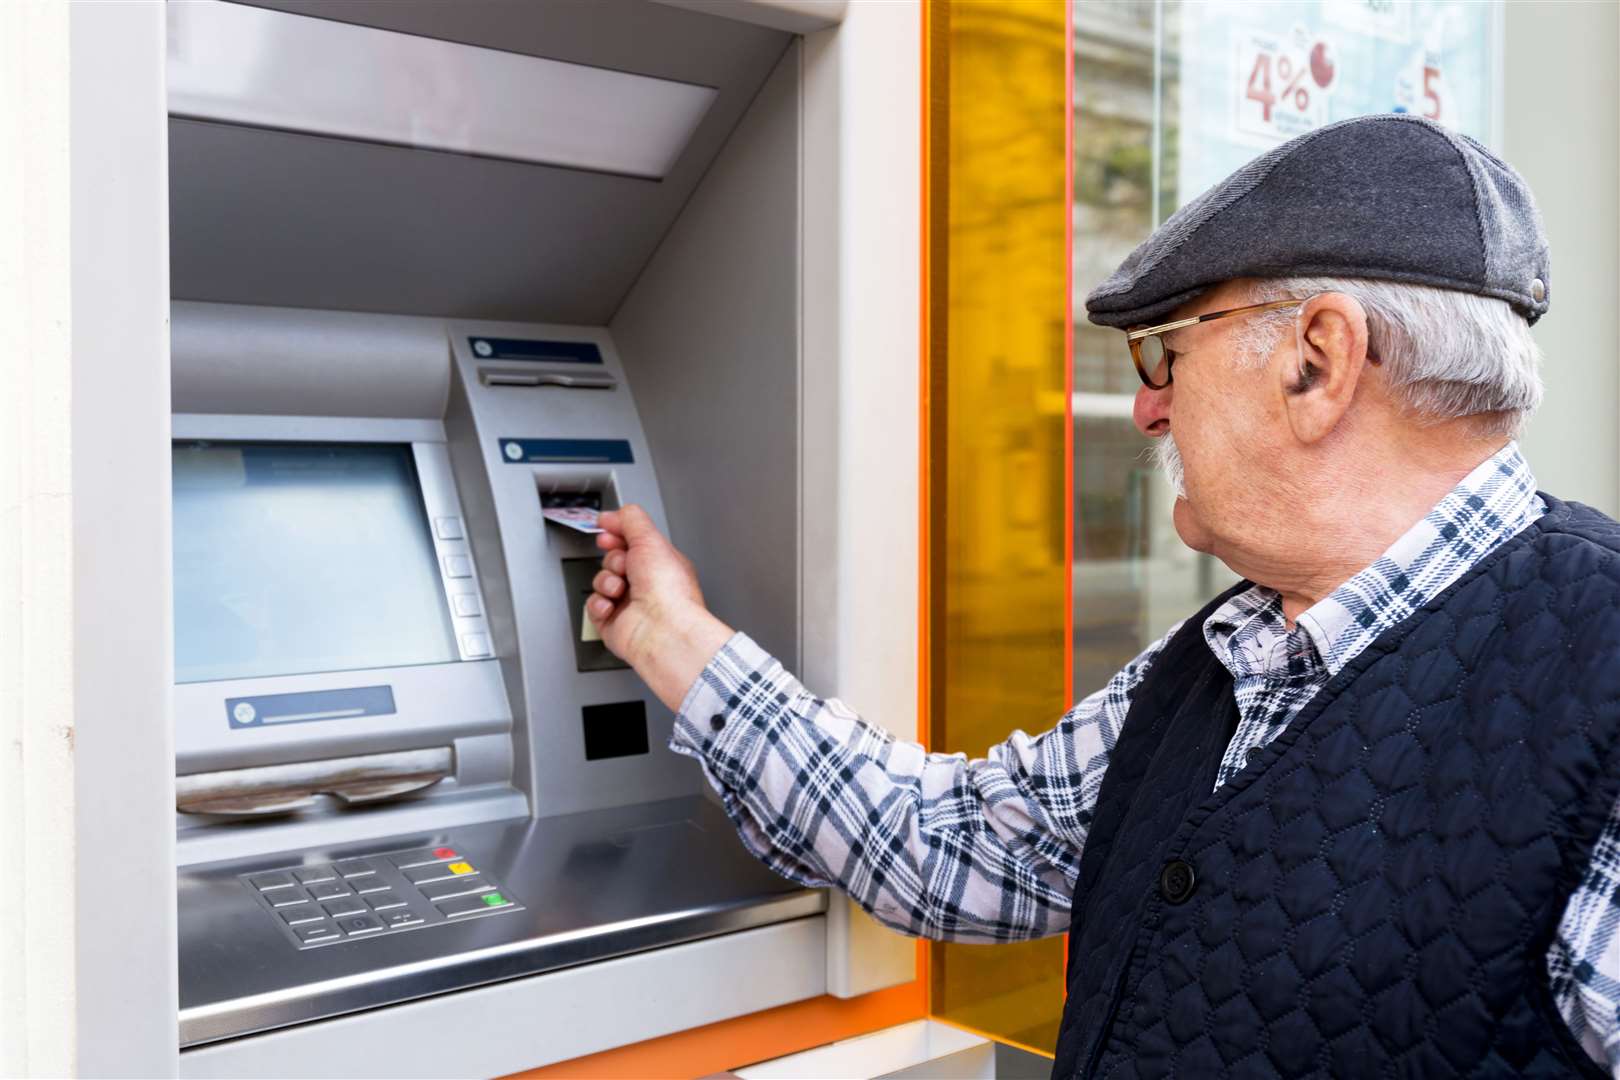 Elderly residents have been targeted in a series of scams involving fraudsters posing as police officers. Photo: Getty Images